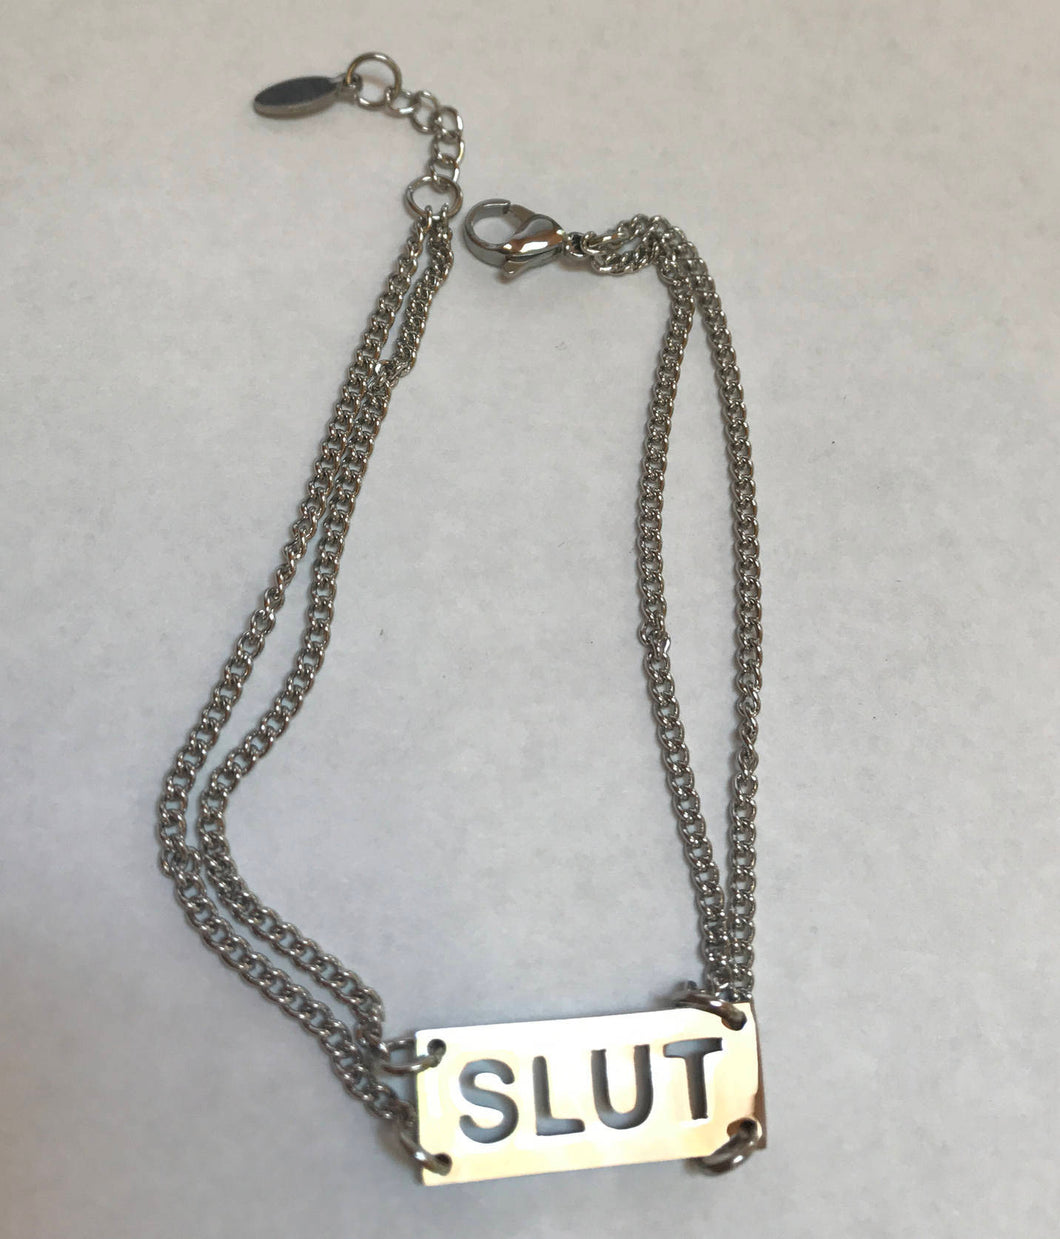 Slut Anklet in Stainless Steel with gift bag included